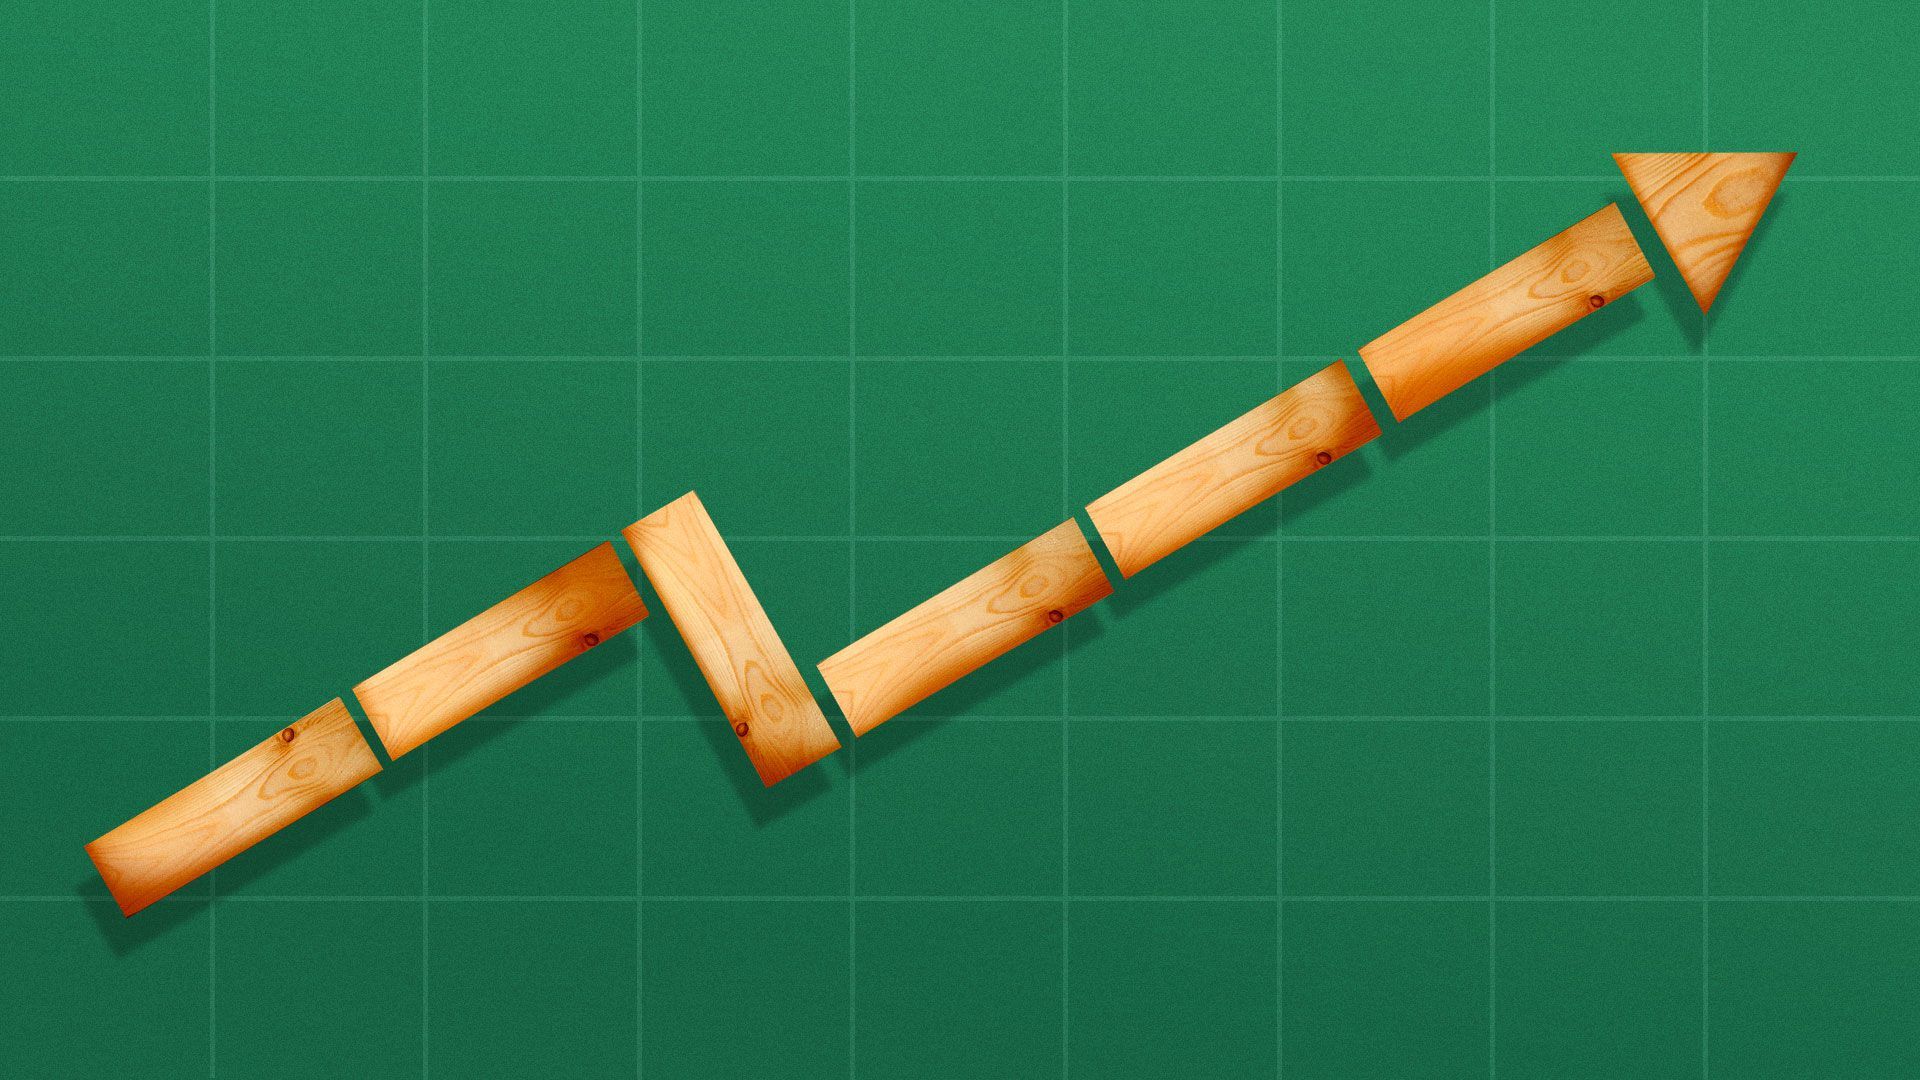 Illustration of lumber 2 x 4 forming an upwards trending line graph